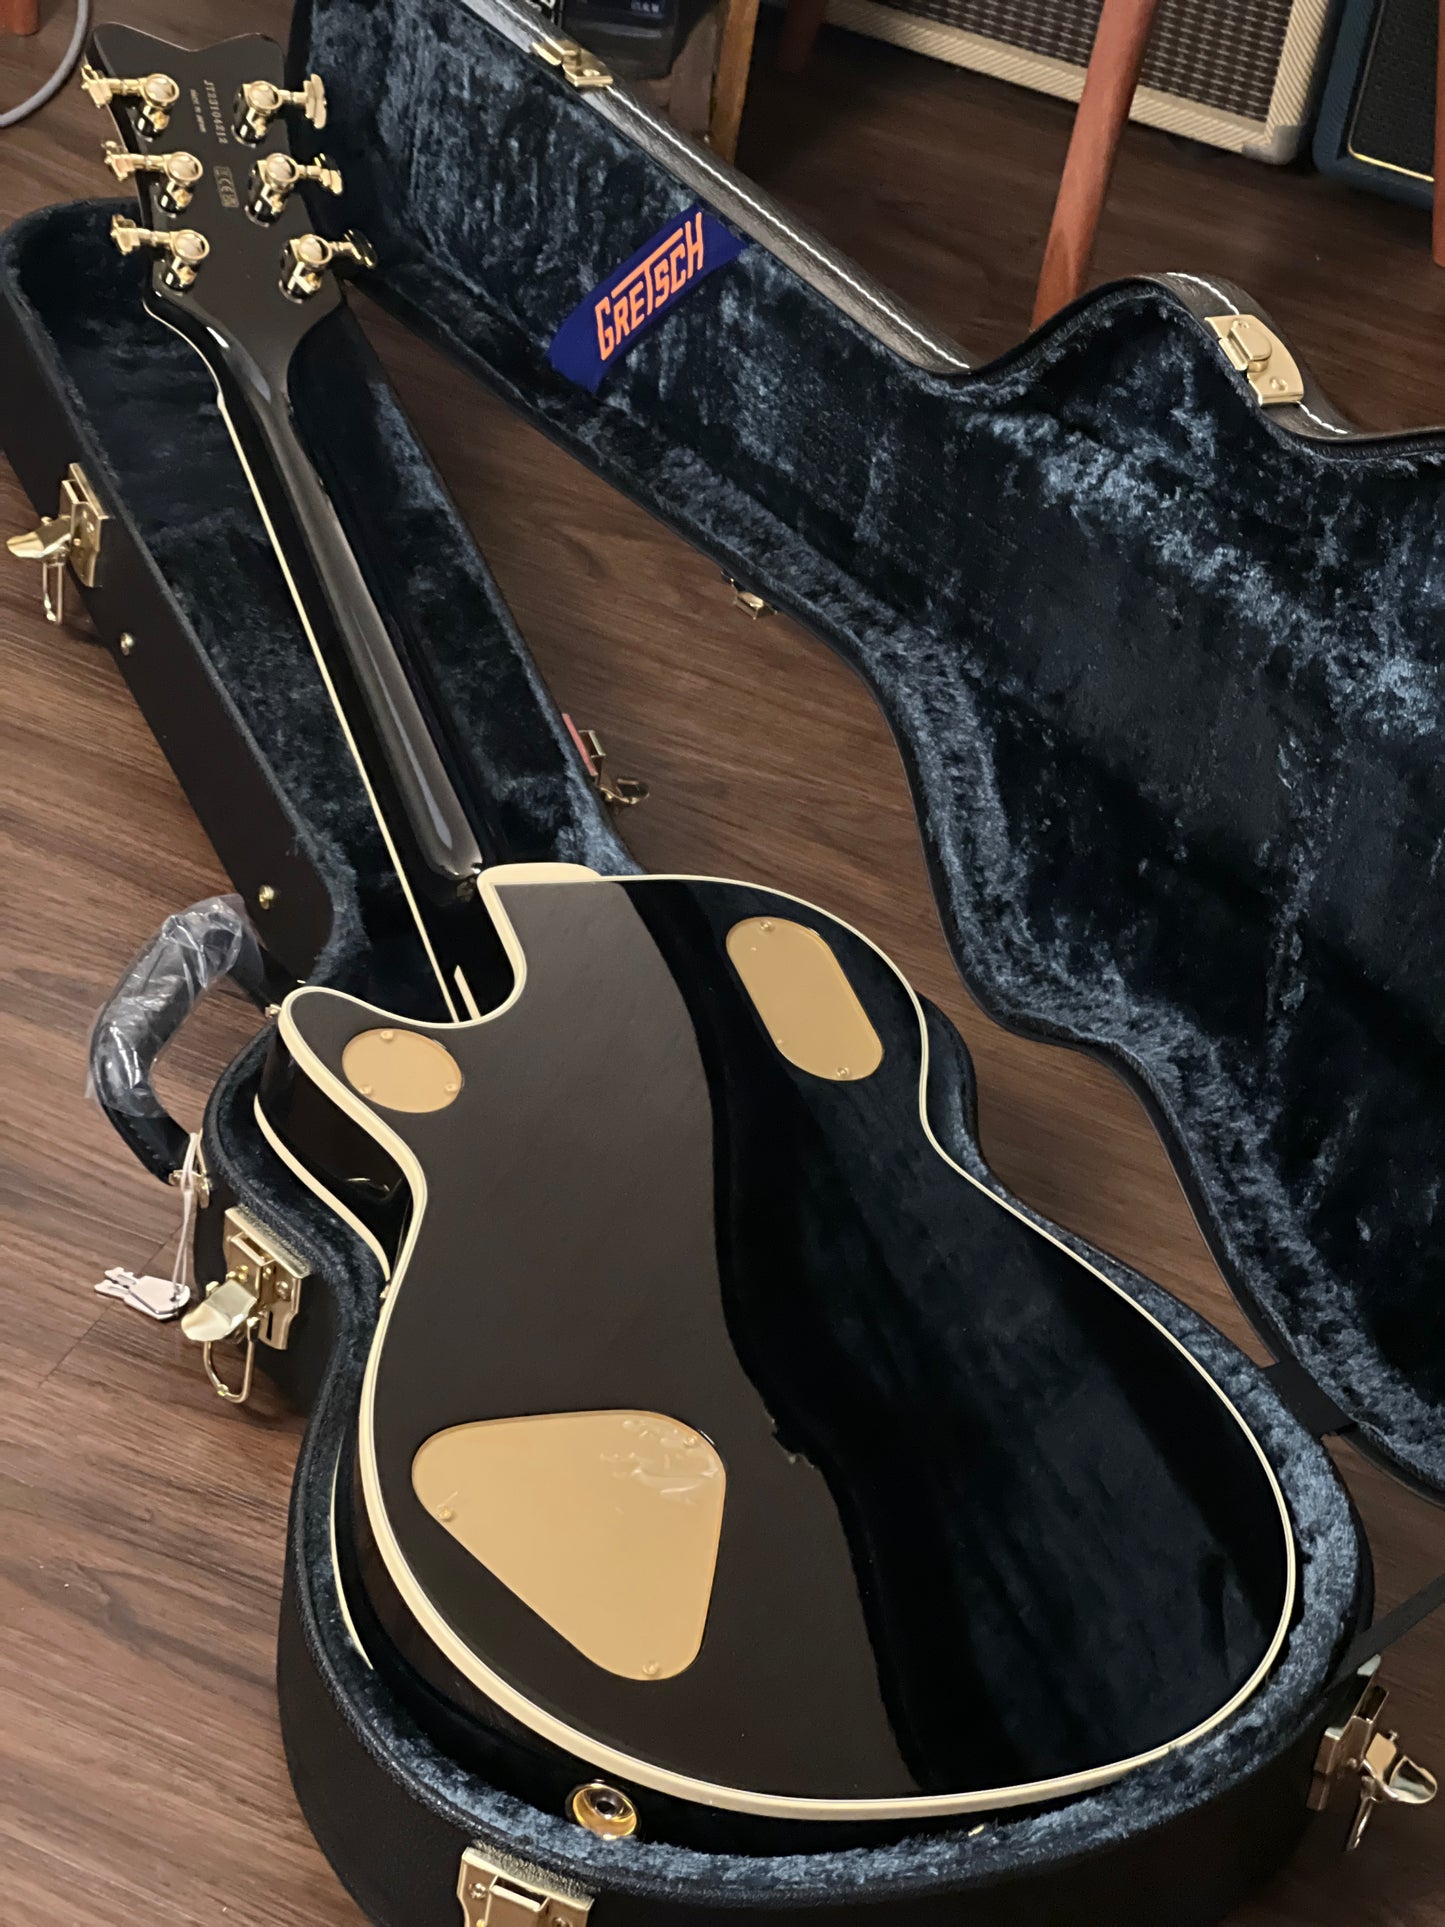 Gretsch G6134TG Limited edition Paisley Penguin in Blackburst over Black and Silver Paisley Sparkle